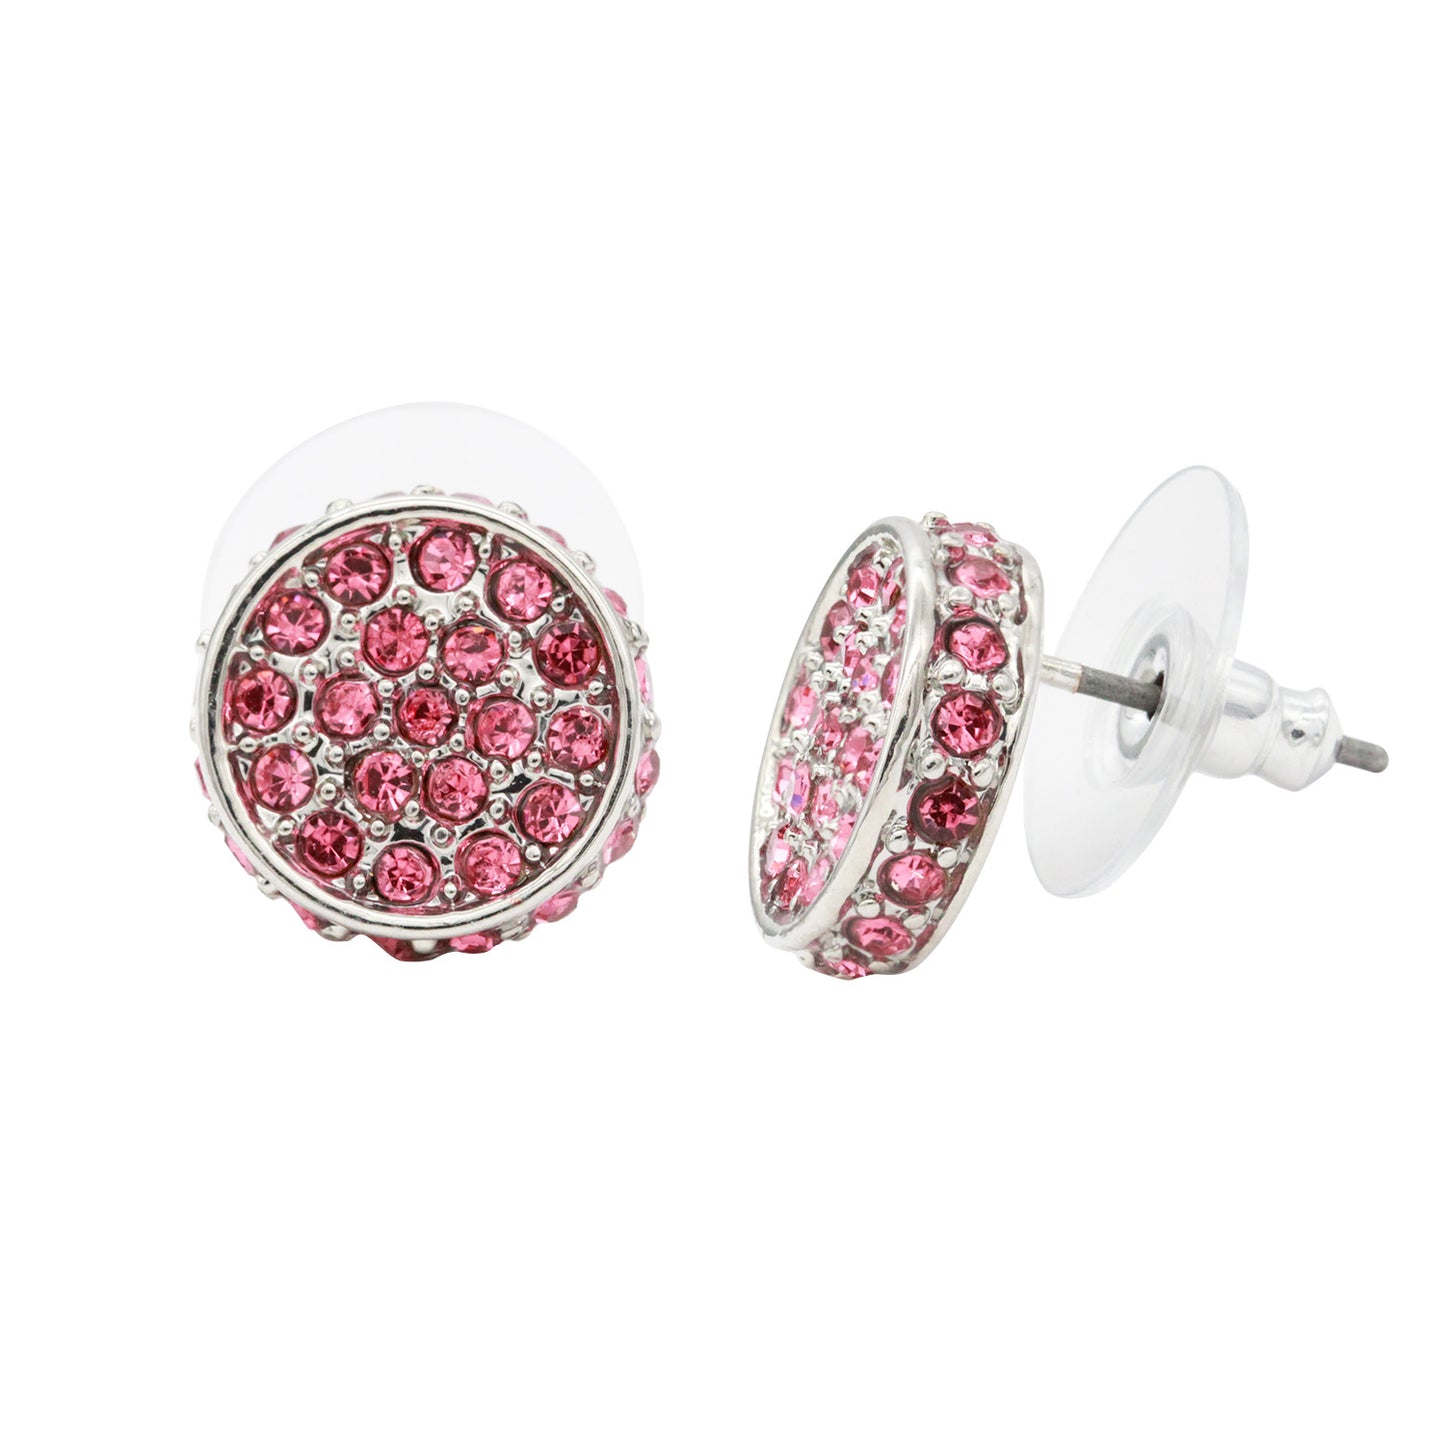 Rhodium Plated Round Stud Earring Paved with Pink Crystal